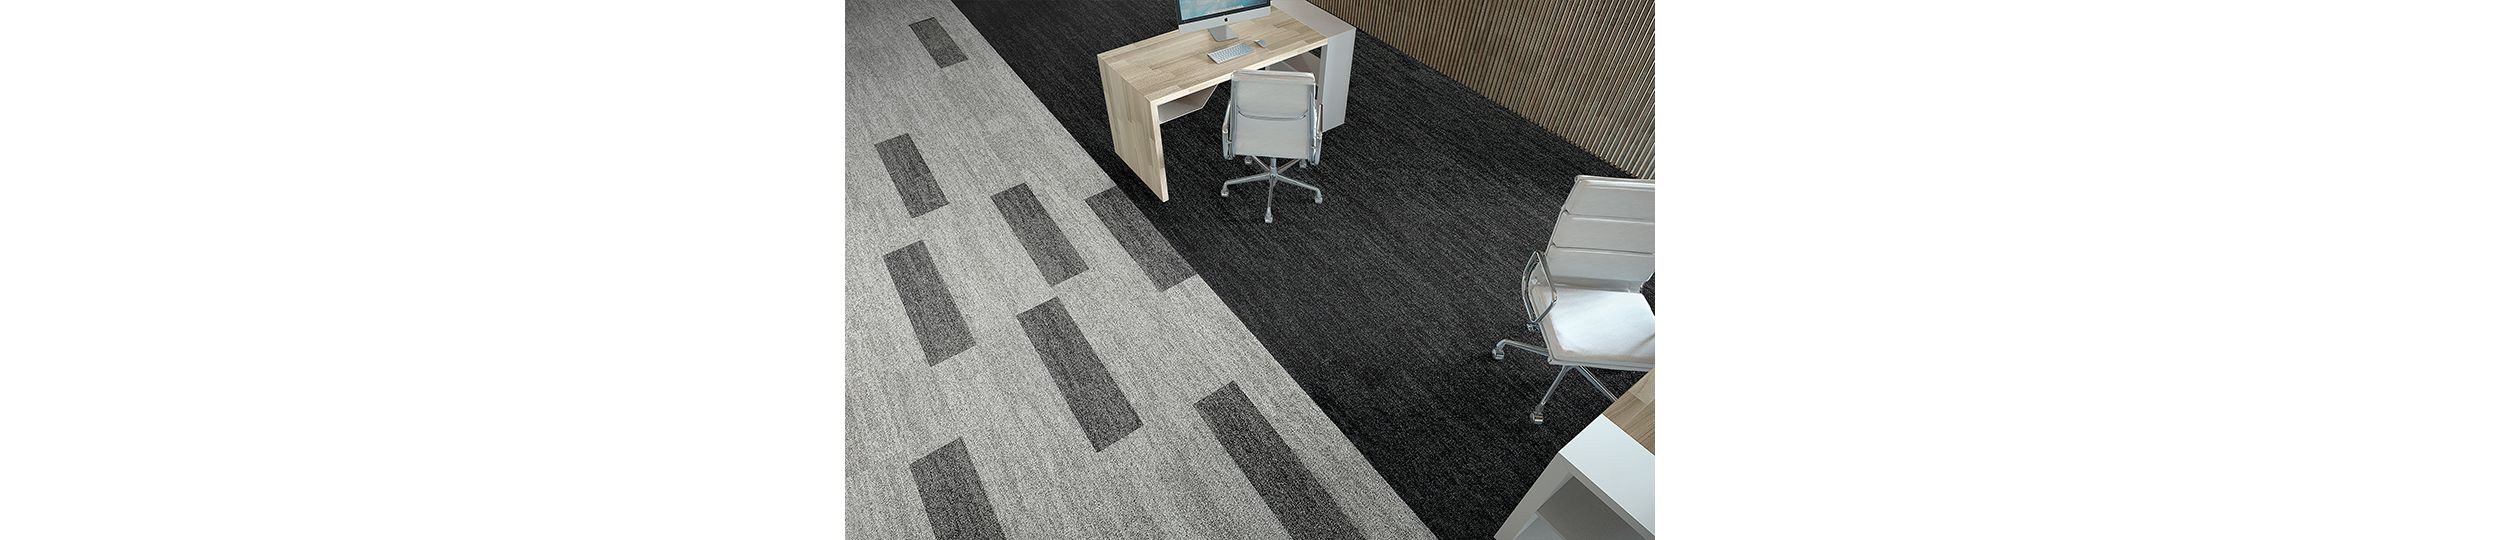 Interface Open Air 402 plank carpet tile in overhead view with small work desk and wood slat wall image number 5